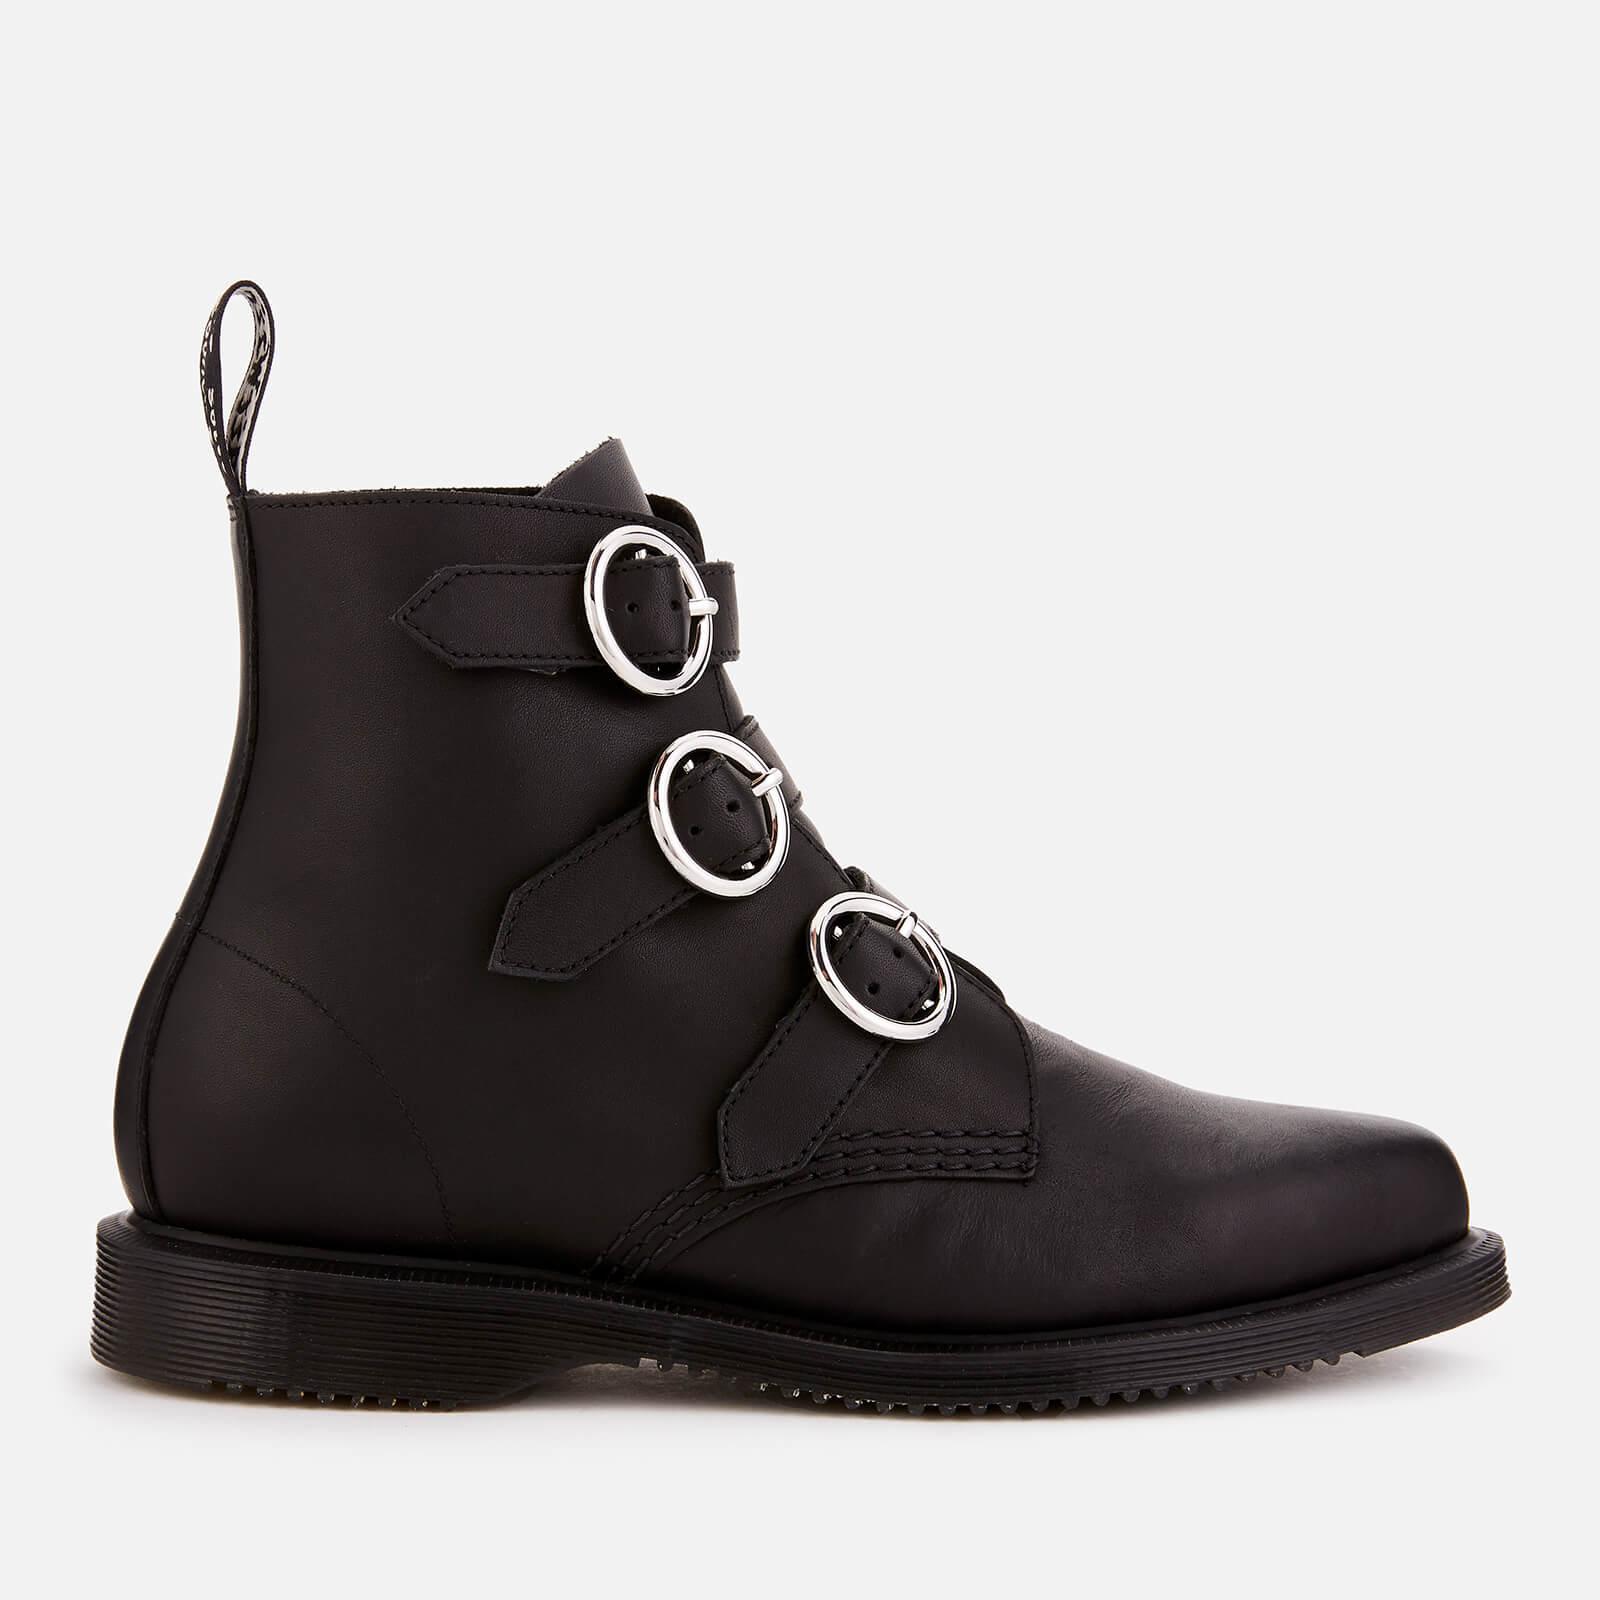 Dr. Martens Maudie Leather Flat Ankle Boots in Black - Lyst